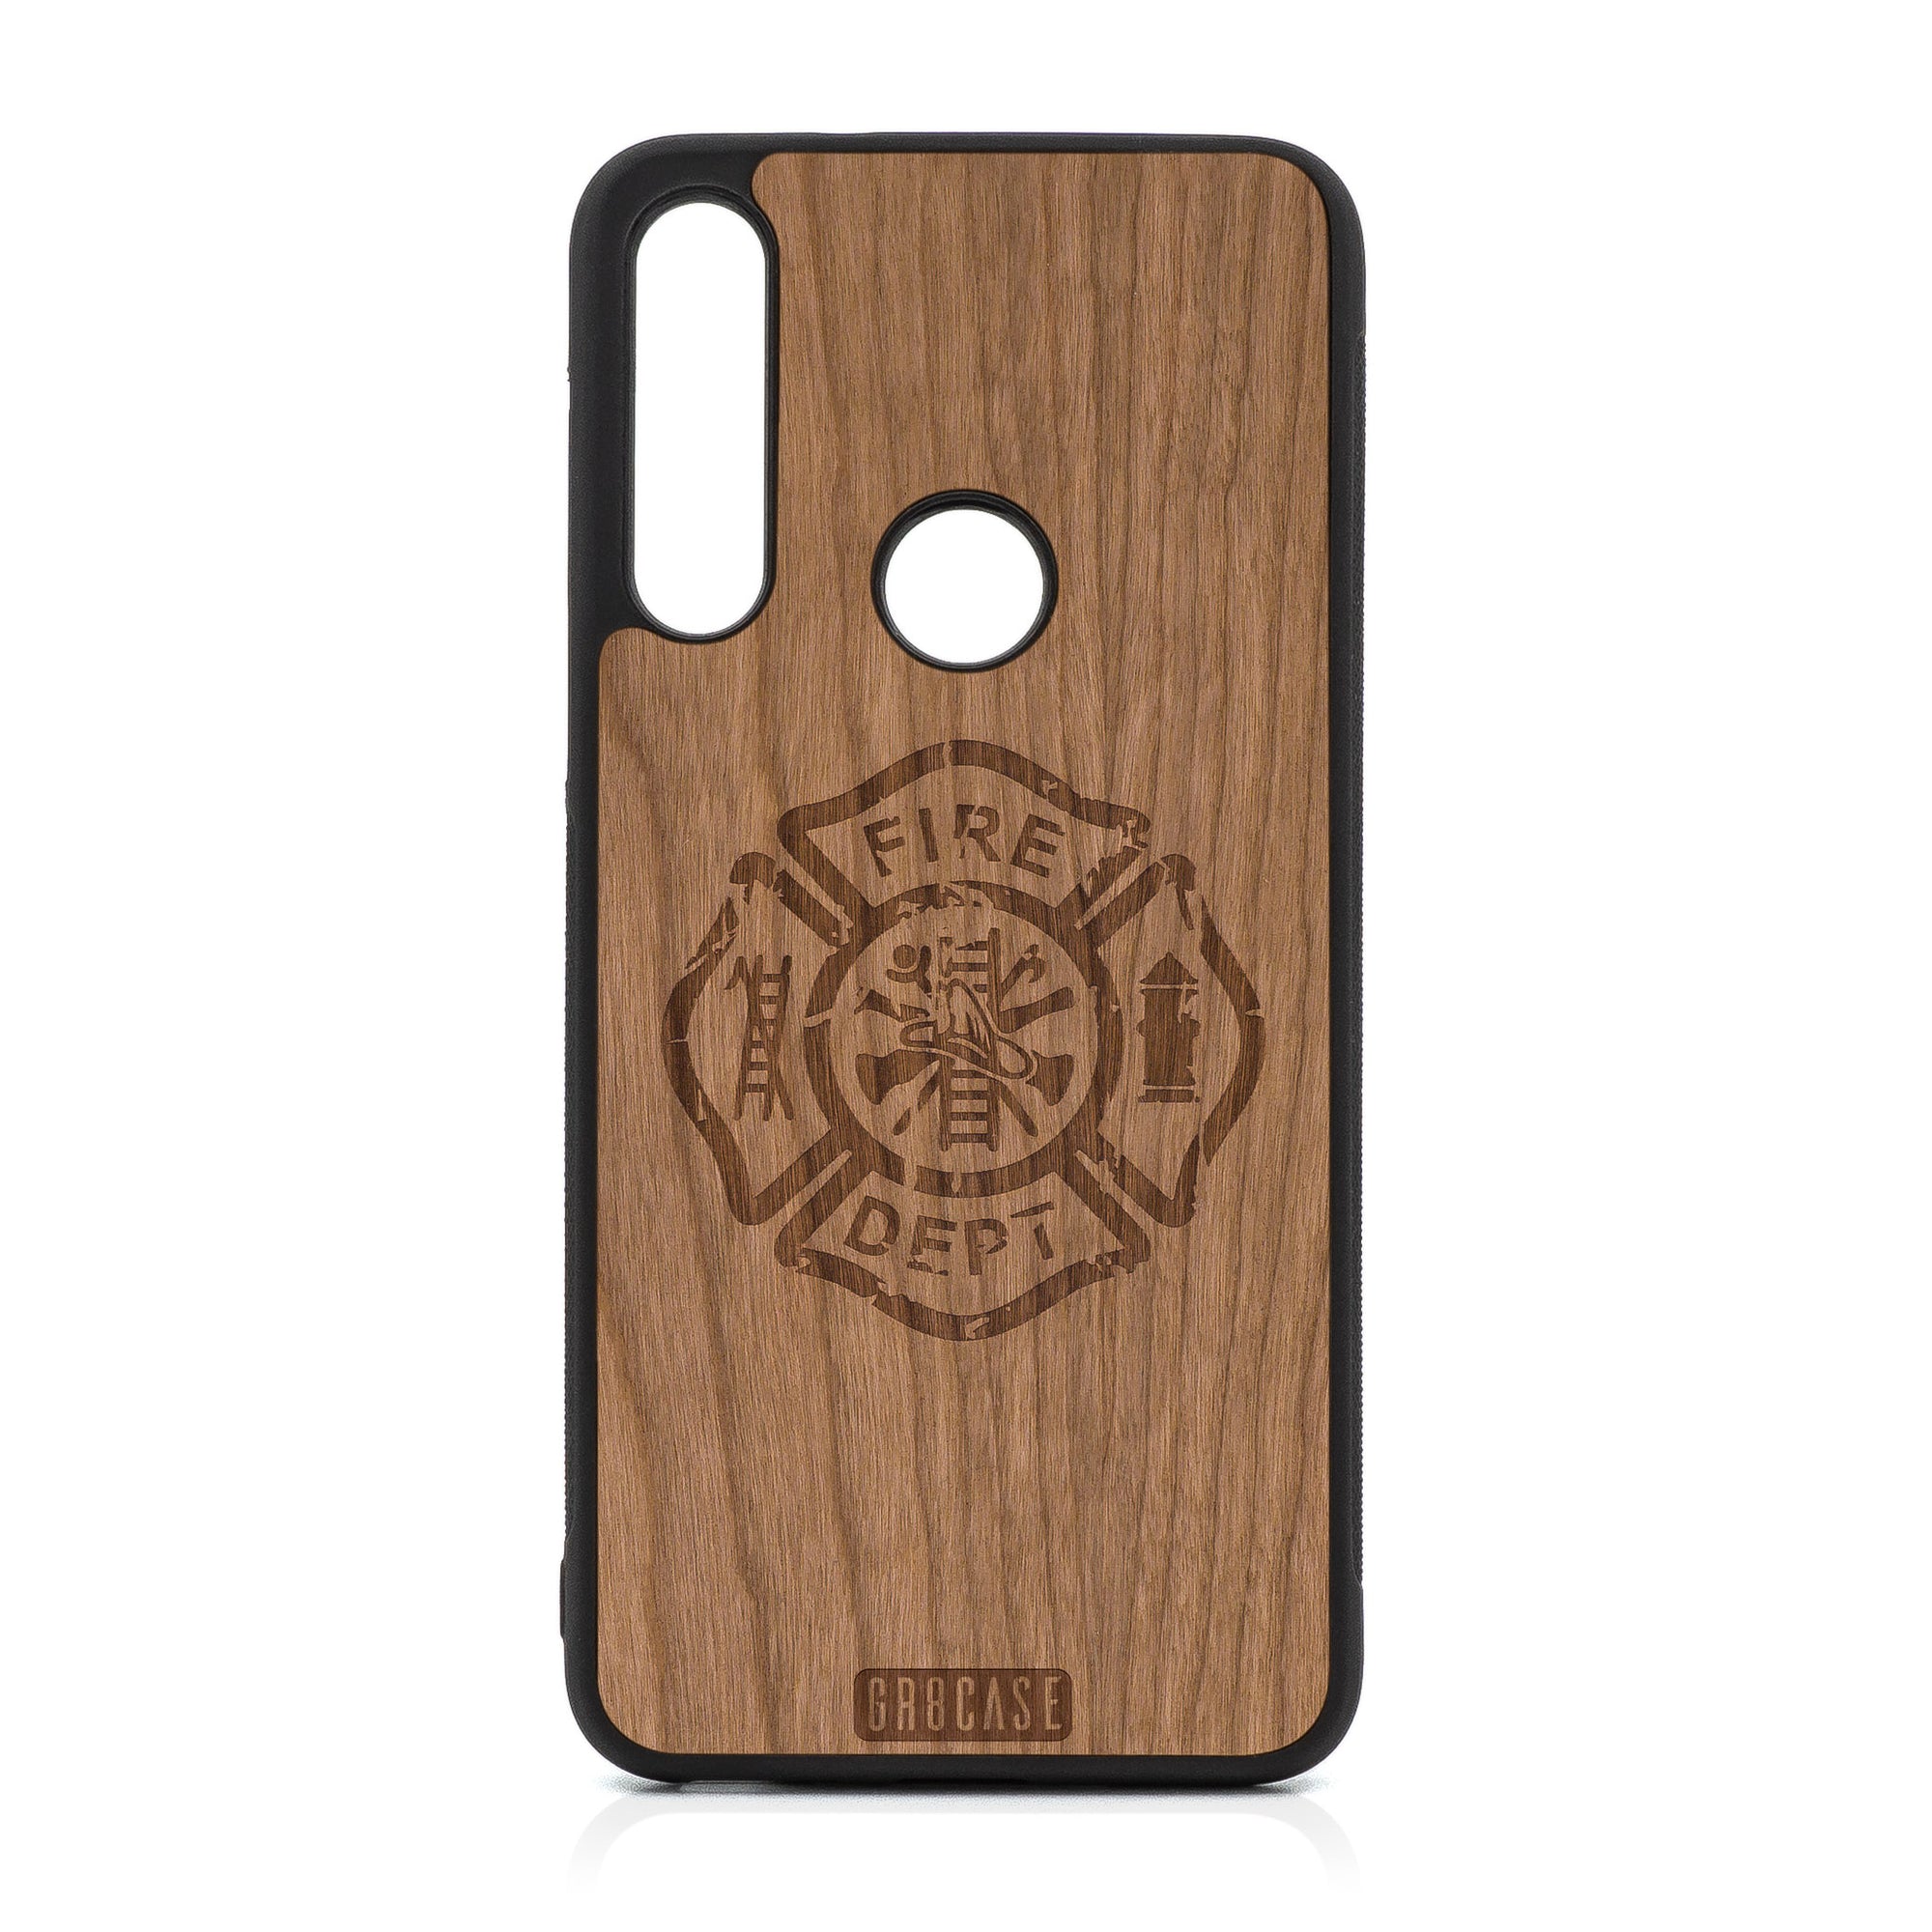 Fire Department Design Wood Case For Moto G Fast